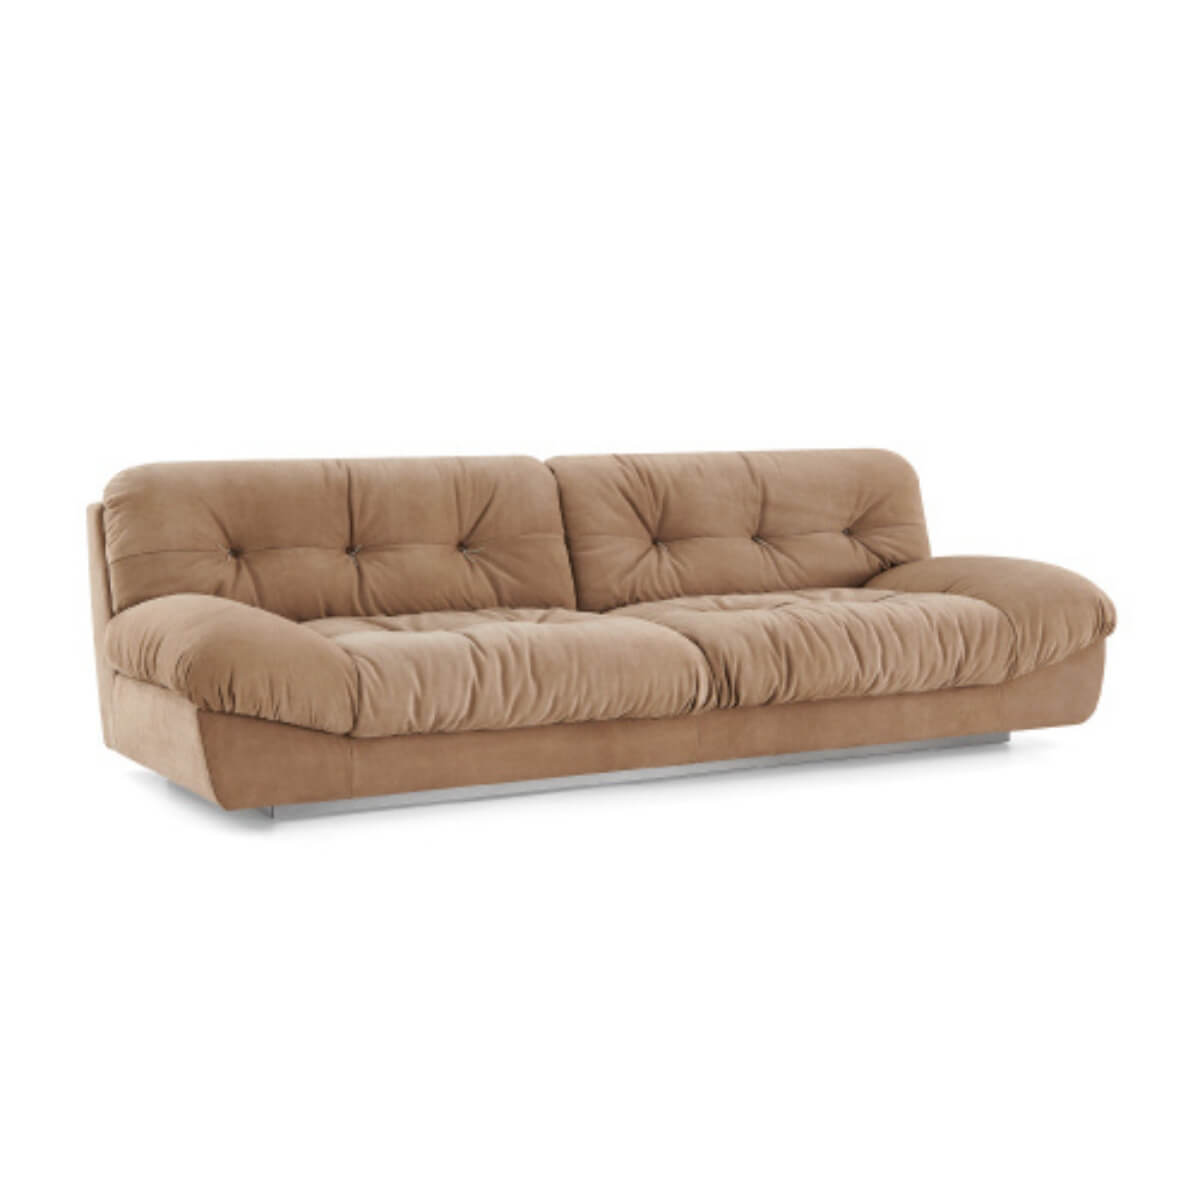 ChromaCraft Matte fabric Sofa - The Perfect Blend of Comfort and Style (Custom made)